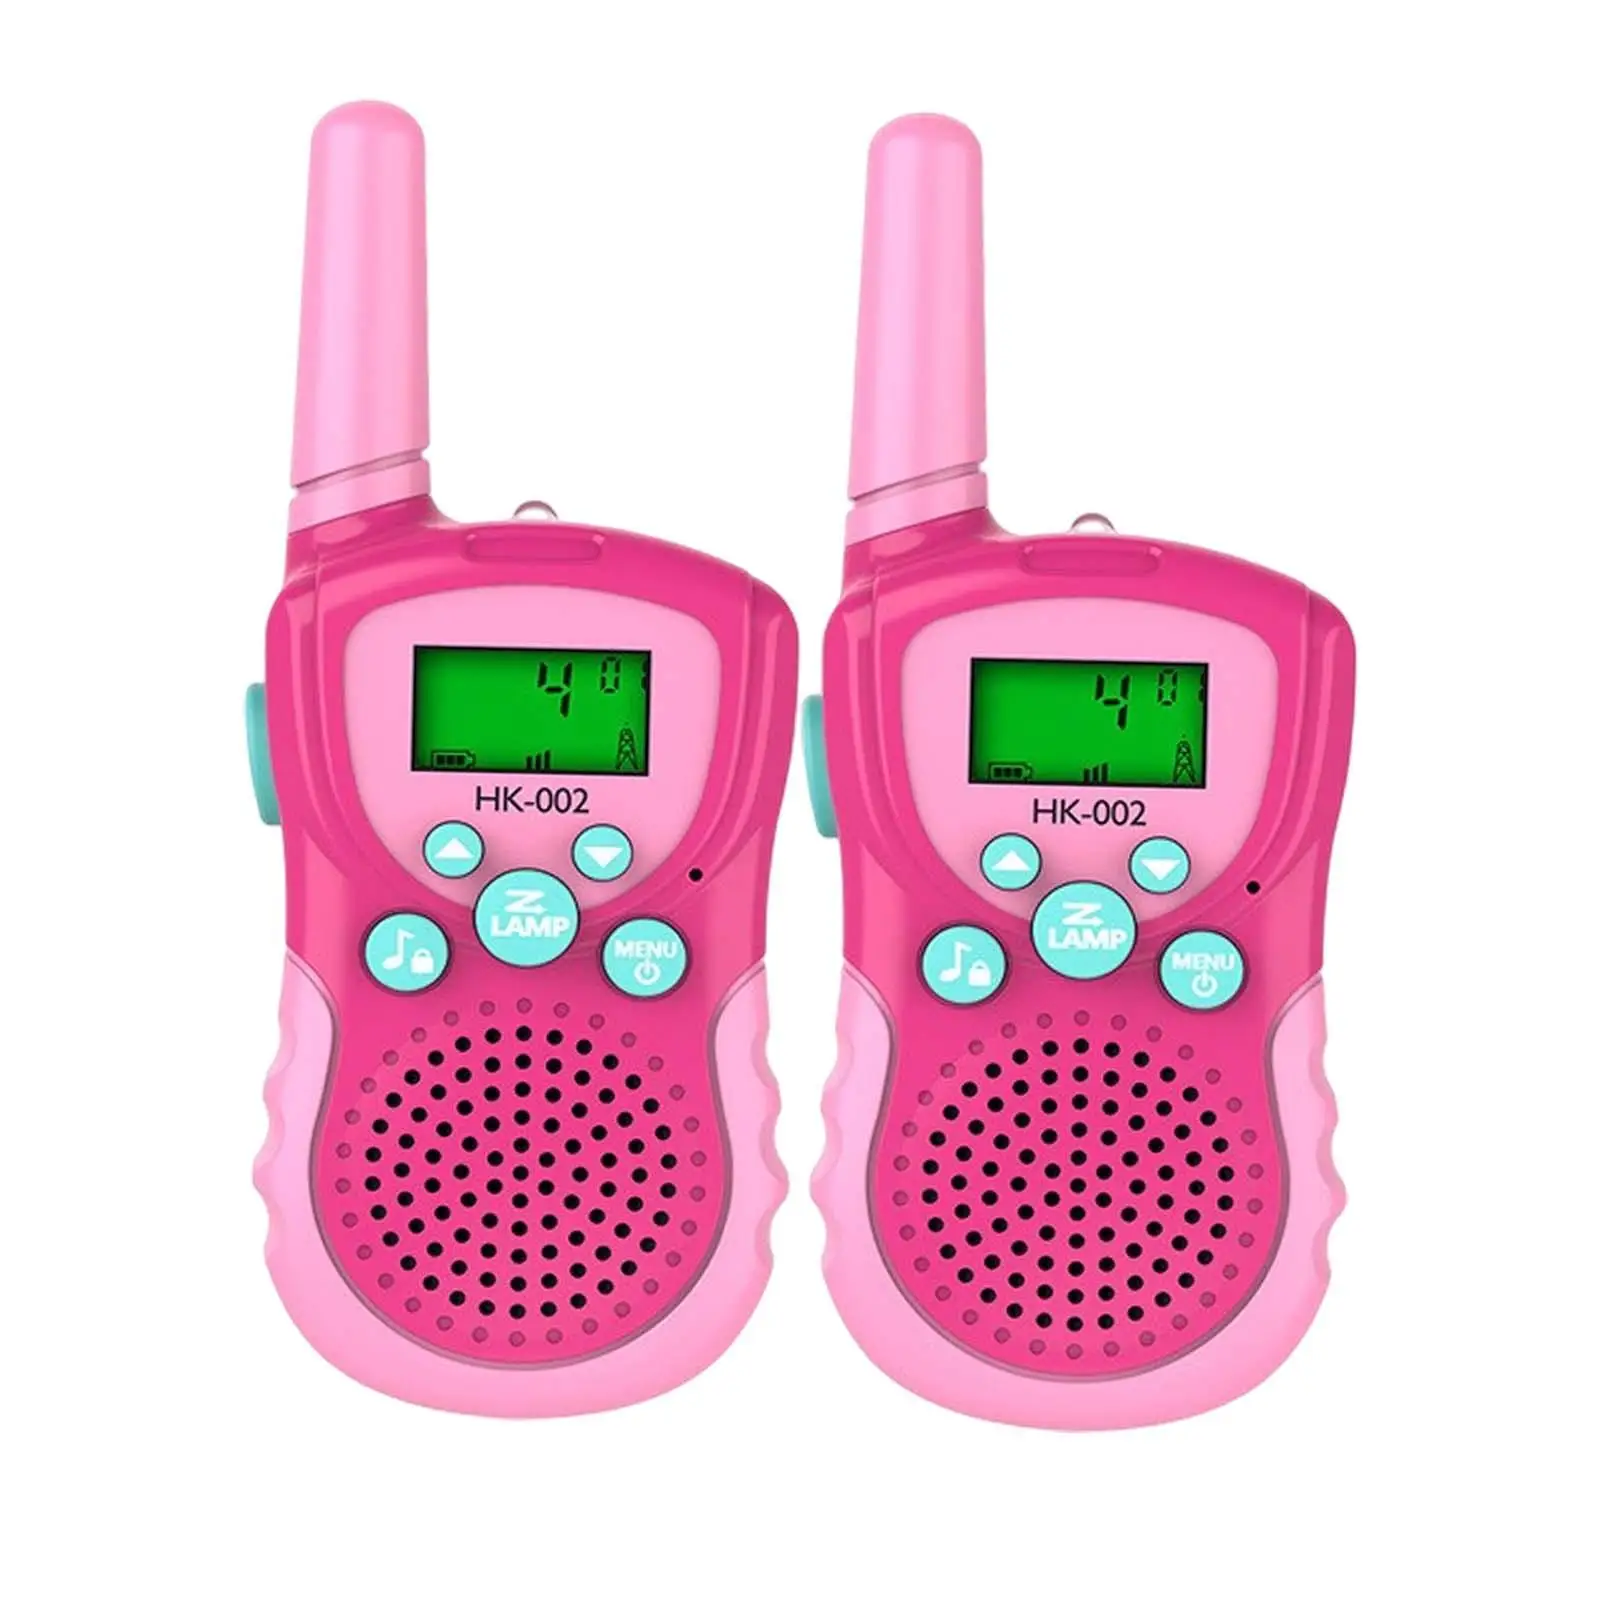 2Pcs Walkie Talkies for Kids with Belt Clip 22 Channels Present 2 Way Radio Toys for Games 3-14 Years Old Camping Hiking Indoor